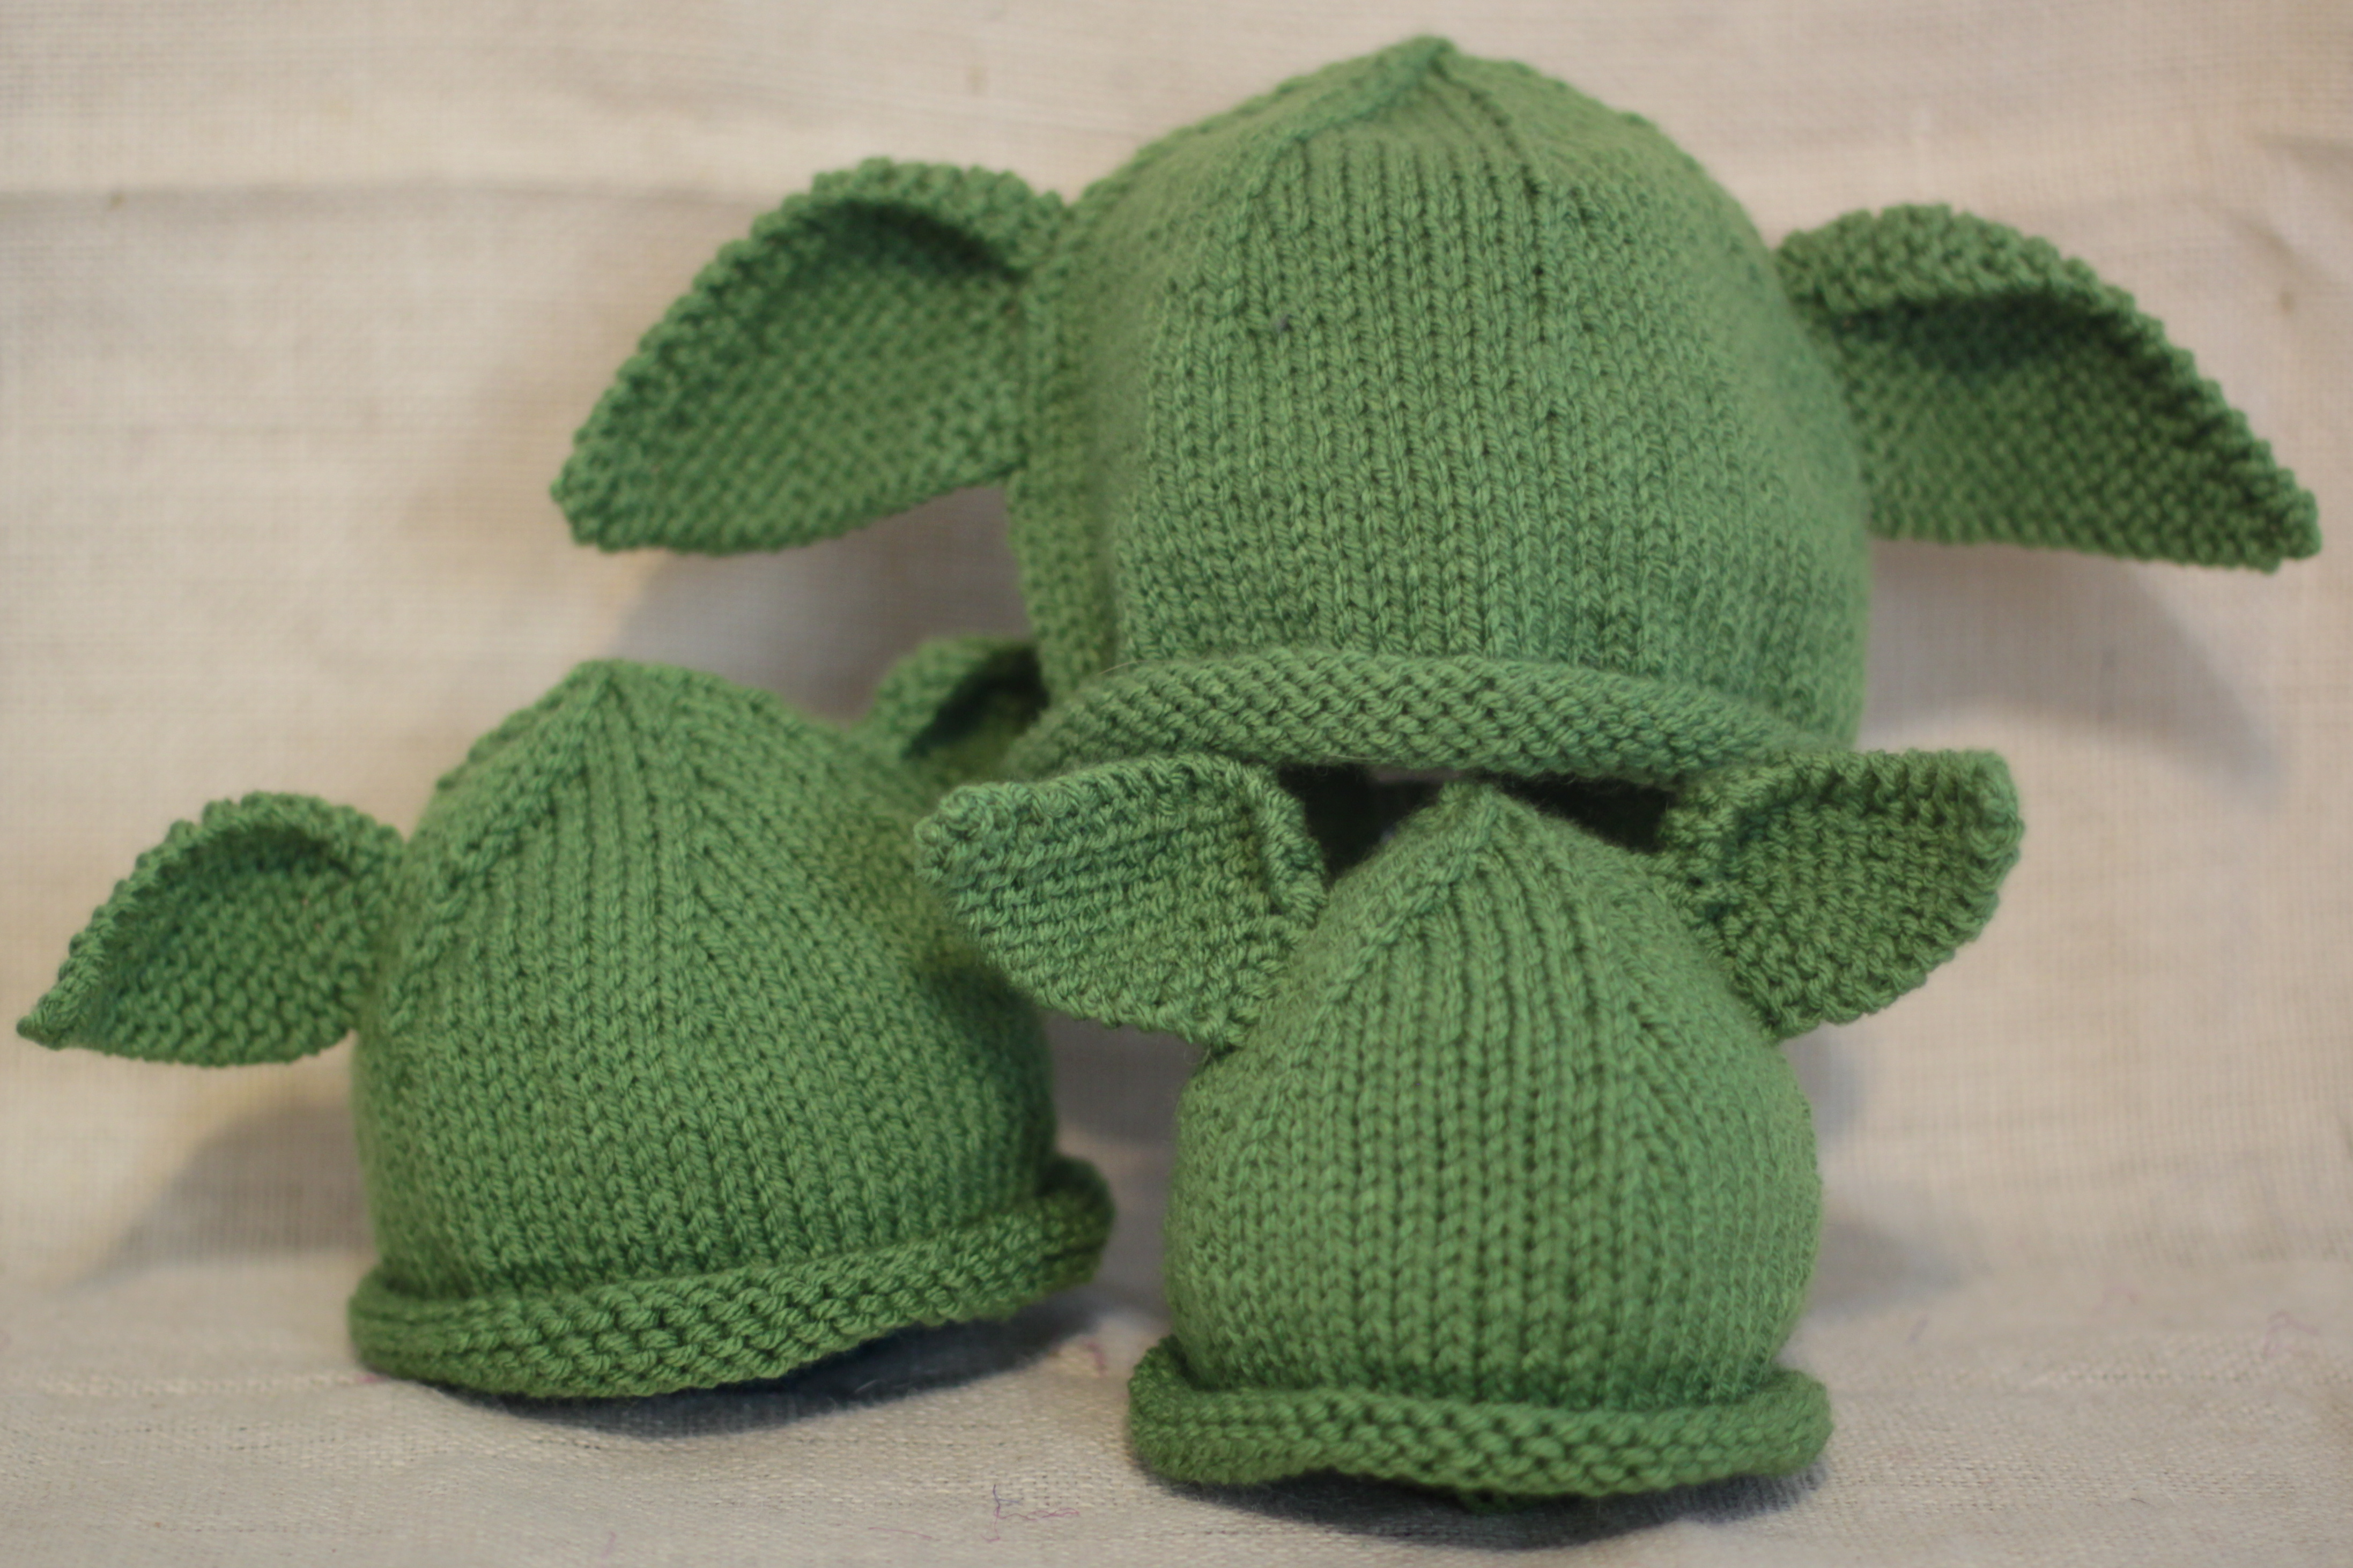 Crochet Yoda Hat Pattern Free Discount Code For How To Knit A Ba Yoda Hat Inside 6d6a1 0a2a2